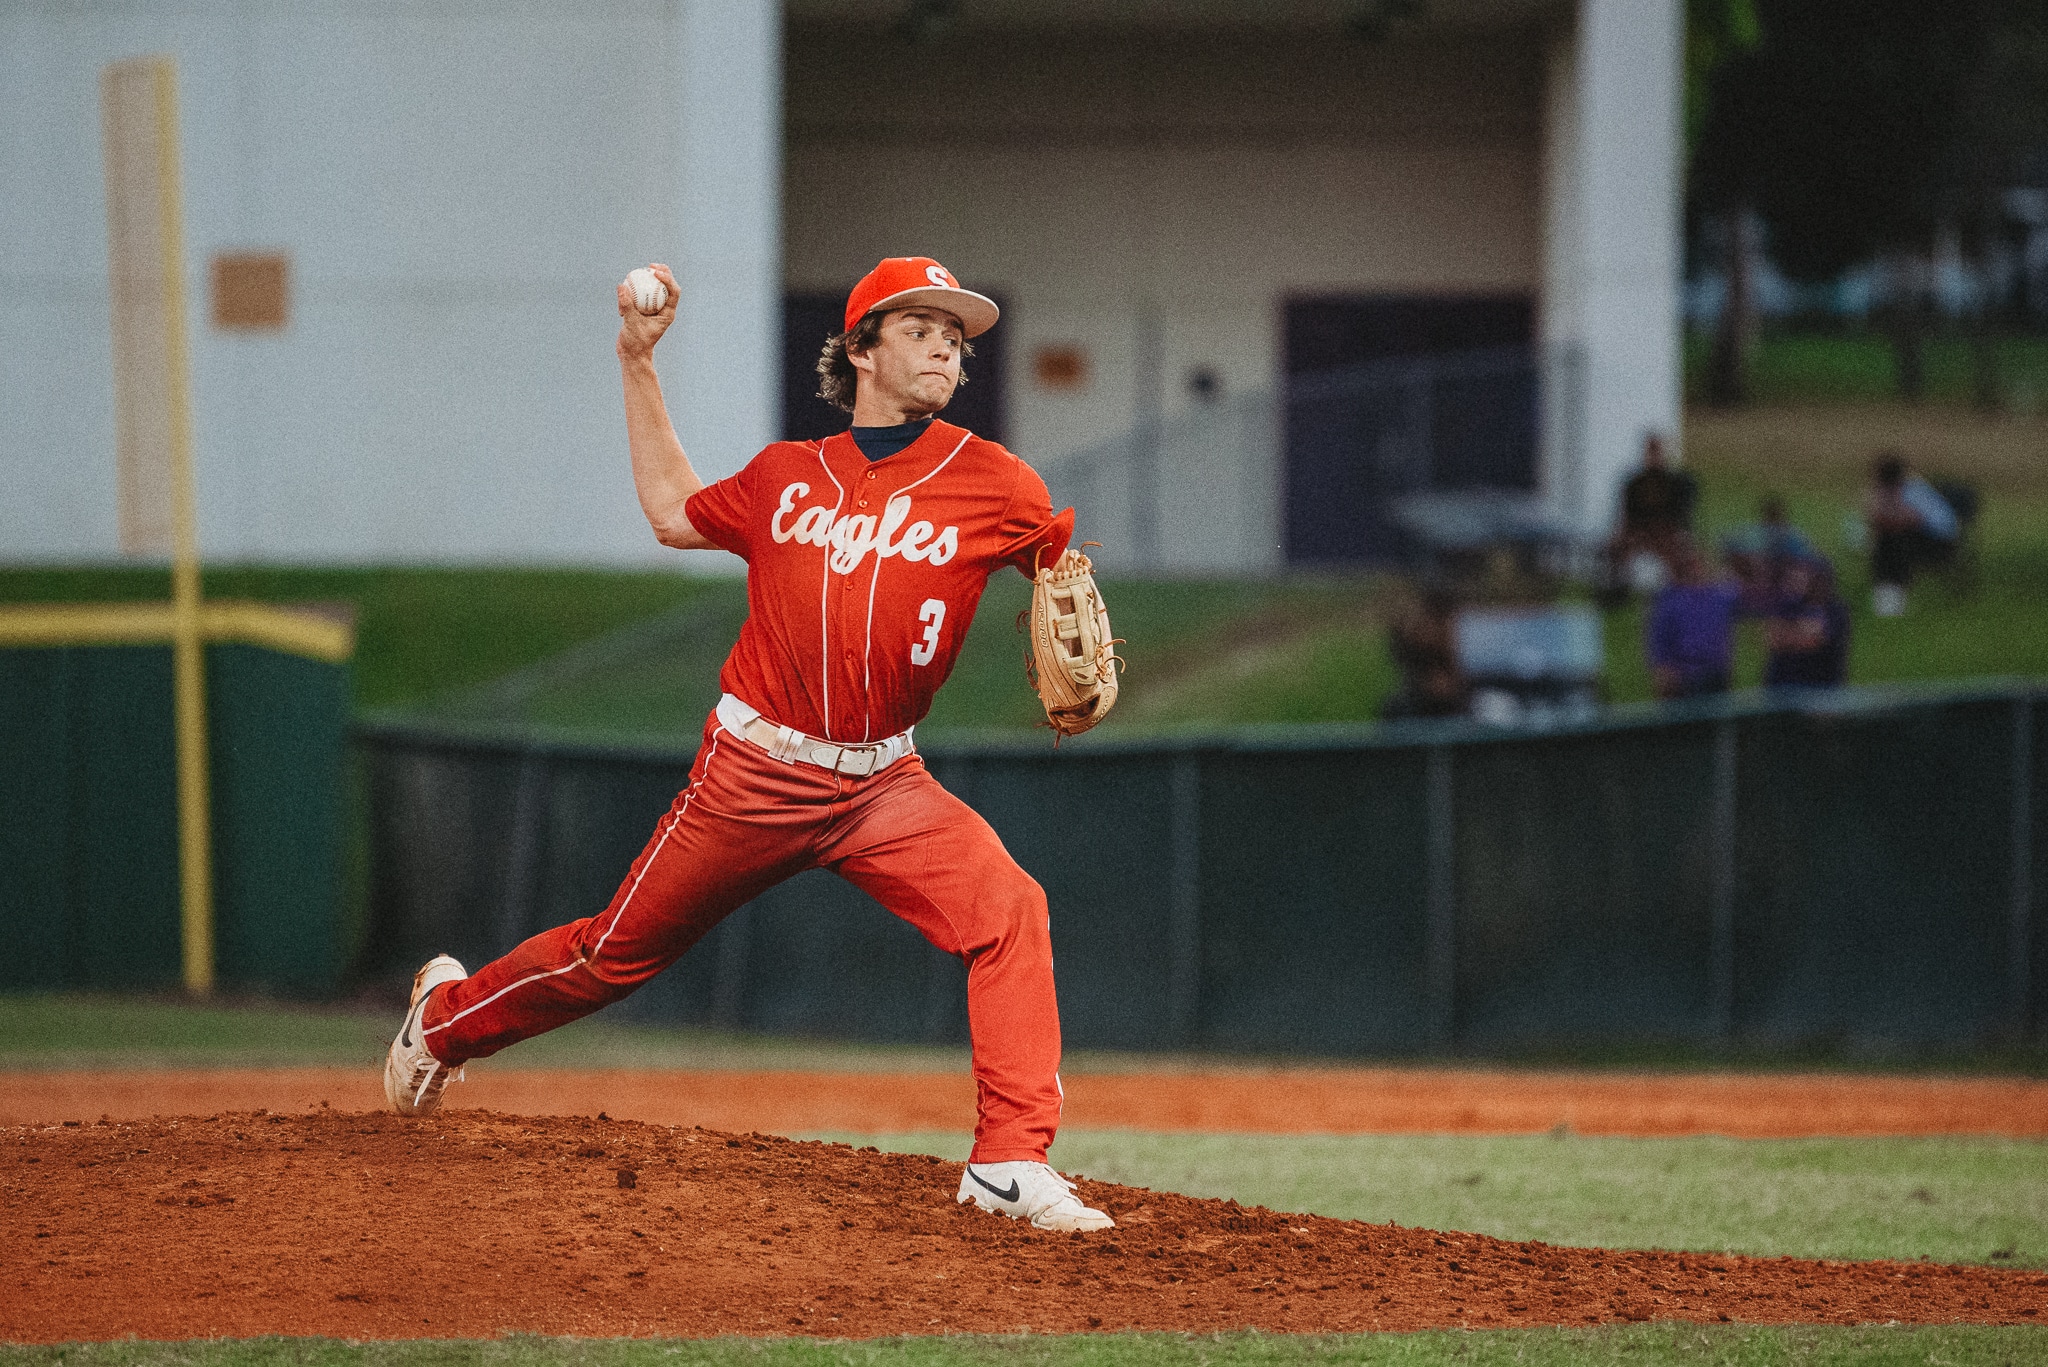 Brendan Anderson (Sr) of Springstead pitching. [Photo by Cynthia Leota]